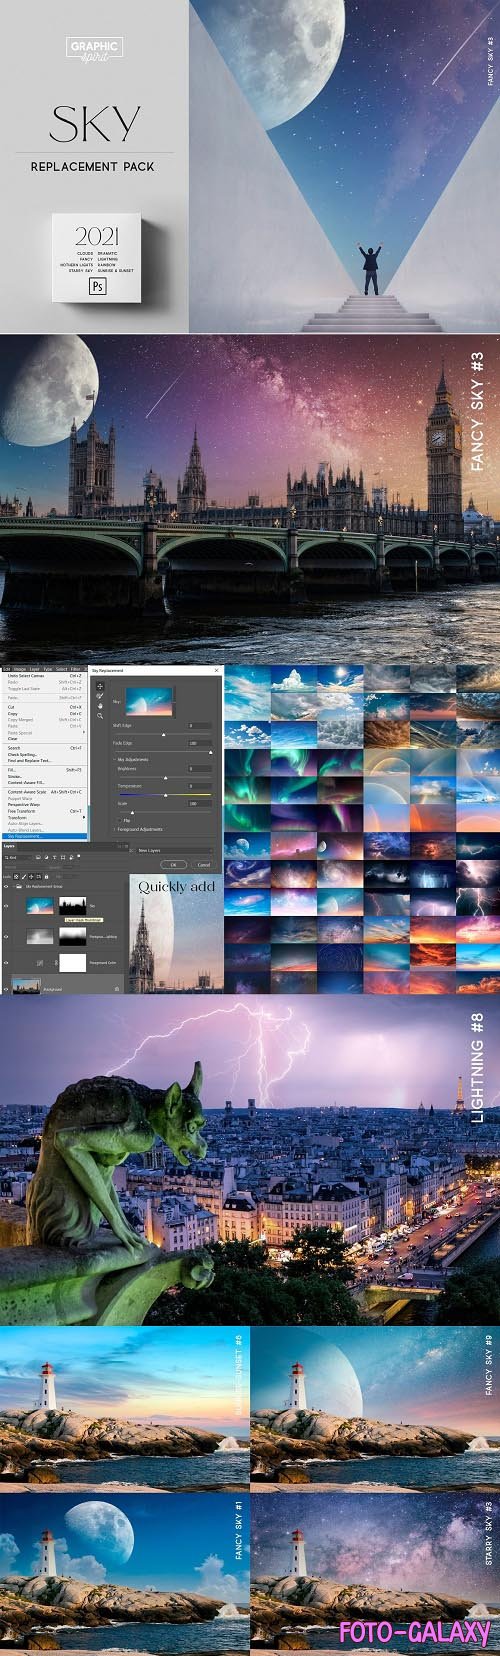 Sky Replacement Pack Photoshop 2021 - 5750499